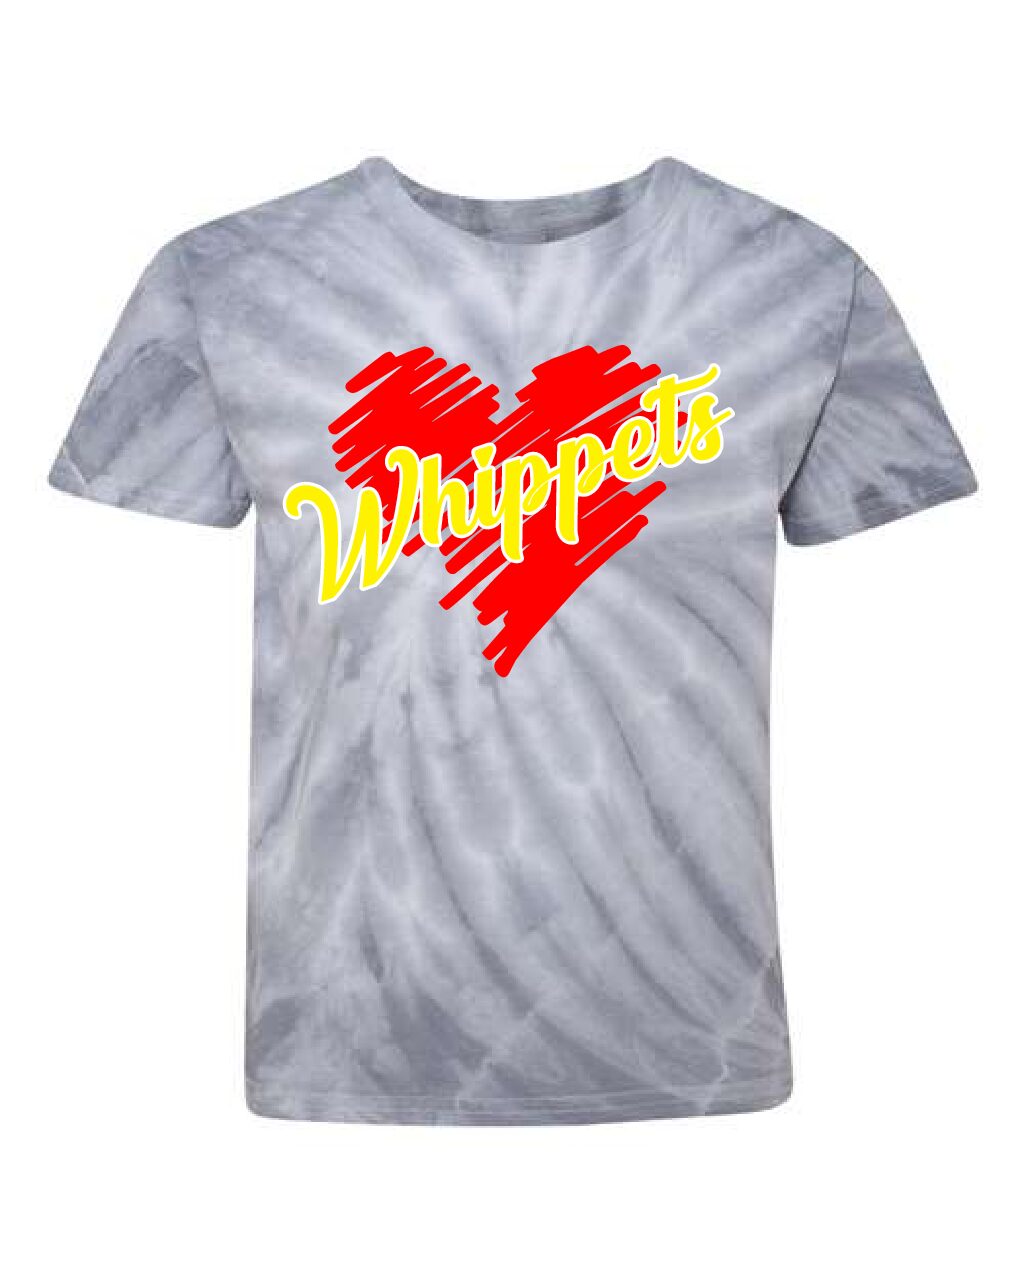 Tie Dye Heart T Shirt (Adult and Youth Sizes)